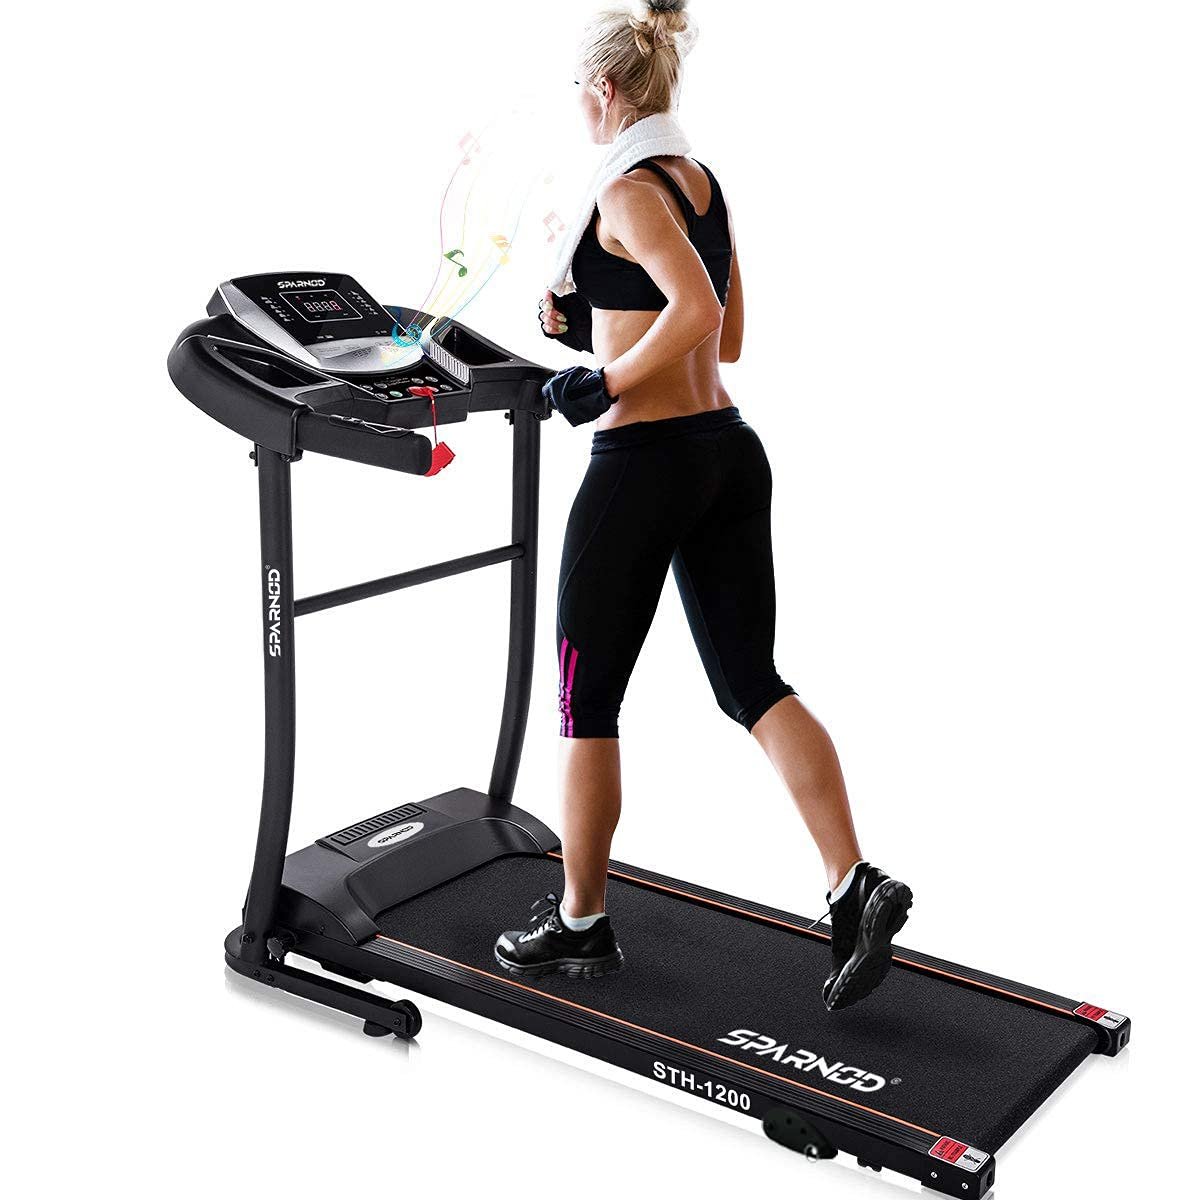 Sparnod Fitness STH-1200 Motorized Treadmill for Home Use